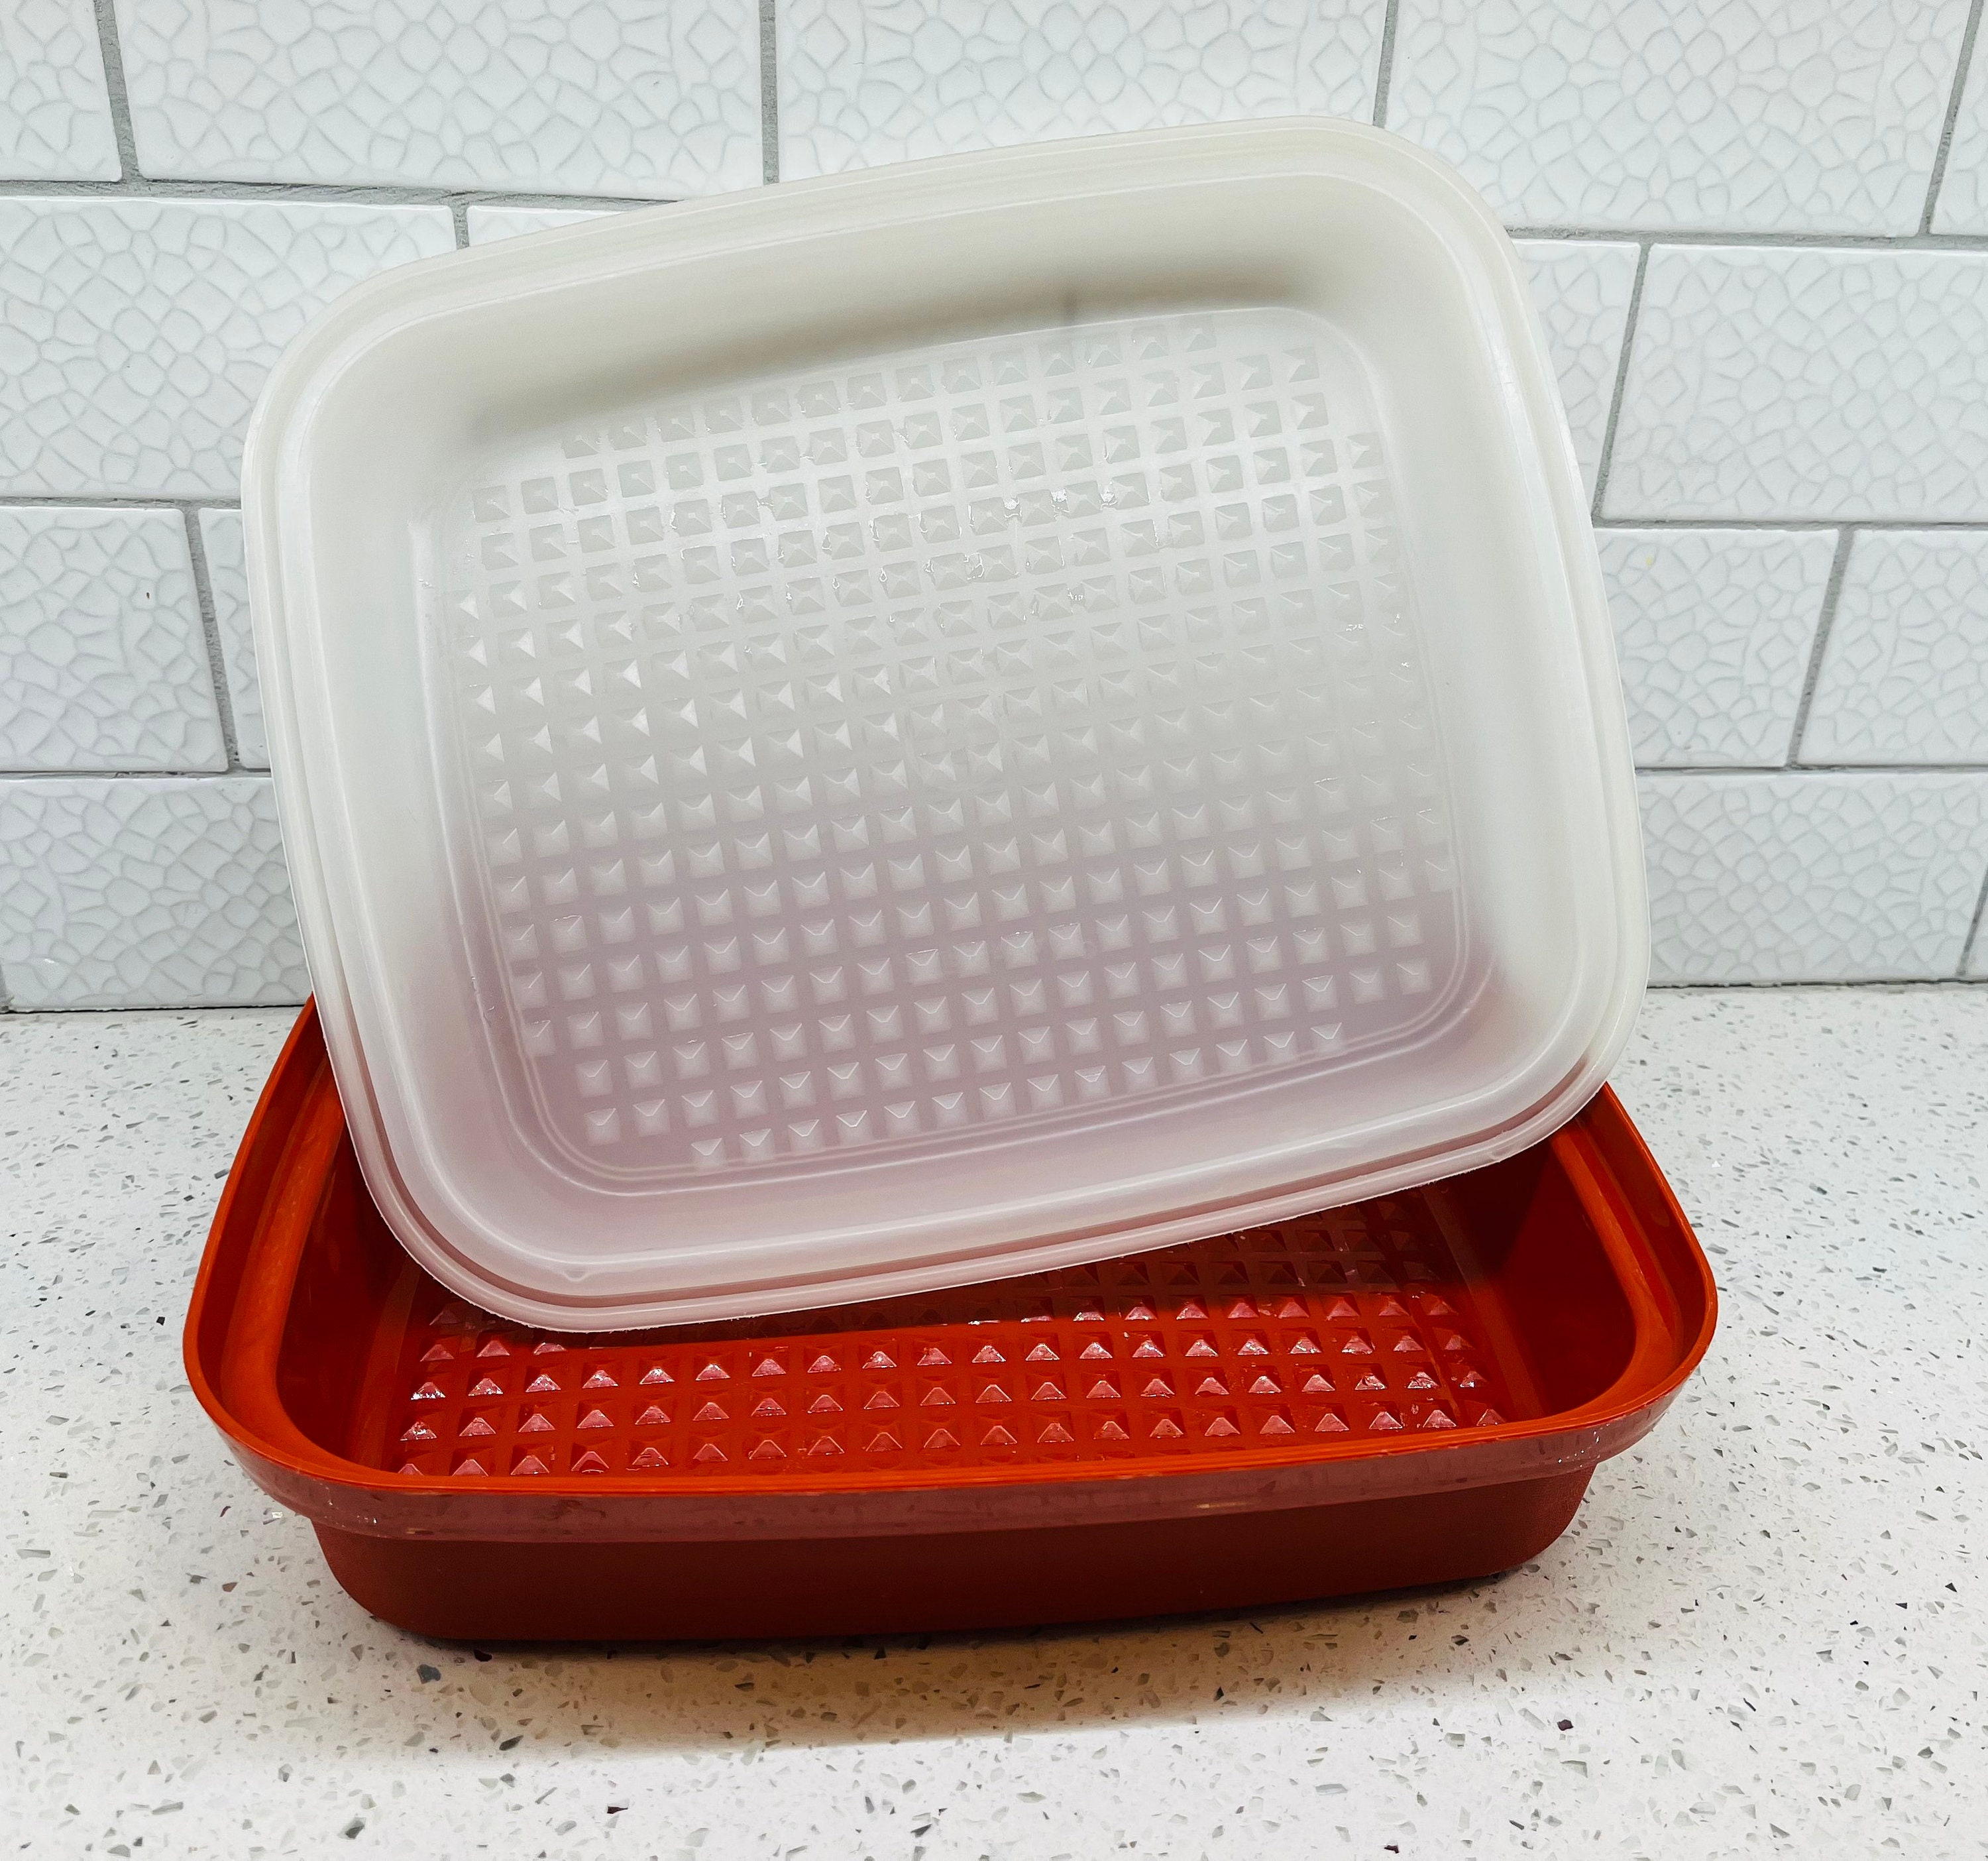 Vintage 70's Tupperware Deli Cold Cuts Cheese Keeper Marinade Container  Excellent Condition, Paprika Tupperware 1292 Frig Storage Container